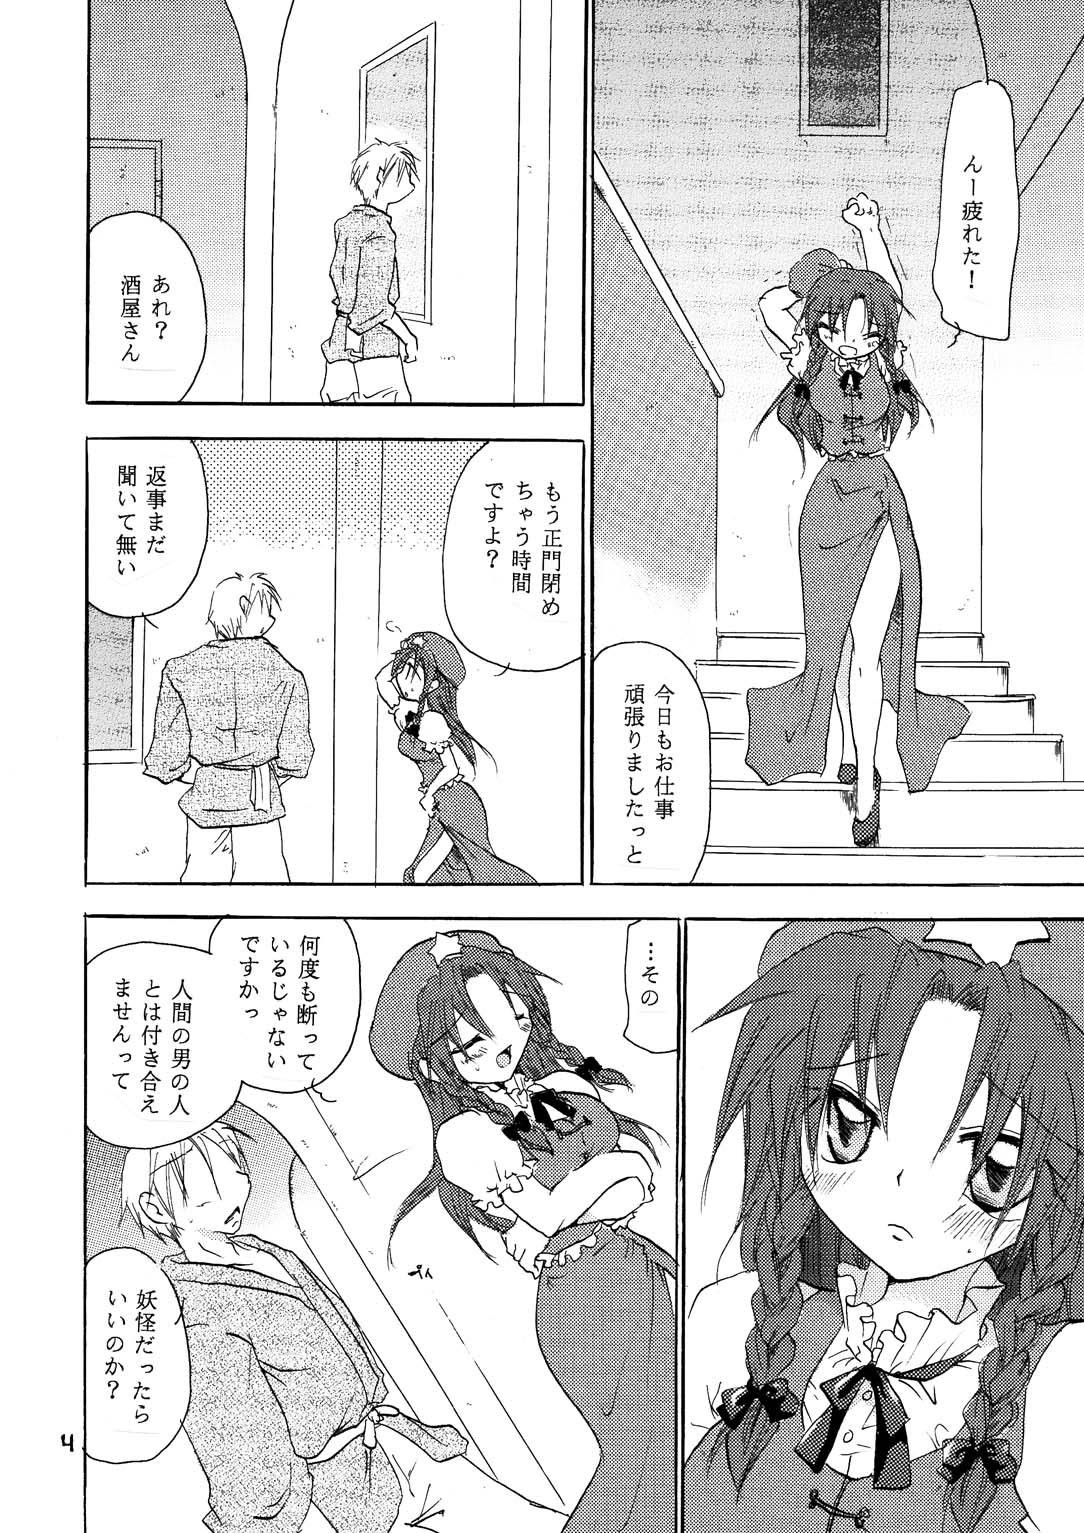 Amazing Meiling Kawaii yo Meiling - Touhou project Couch - Page 3